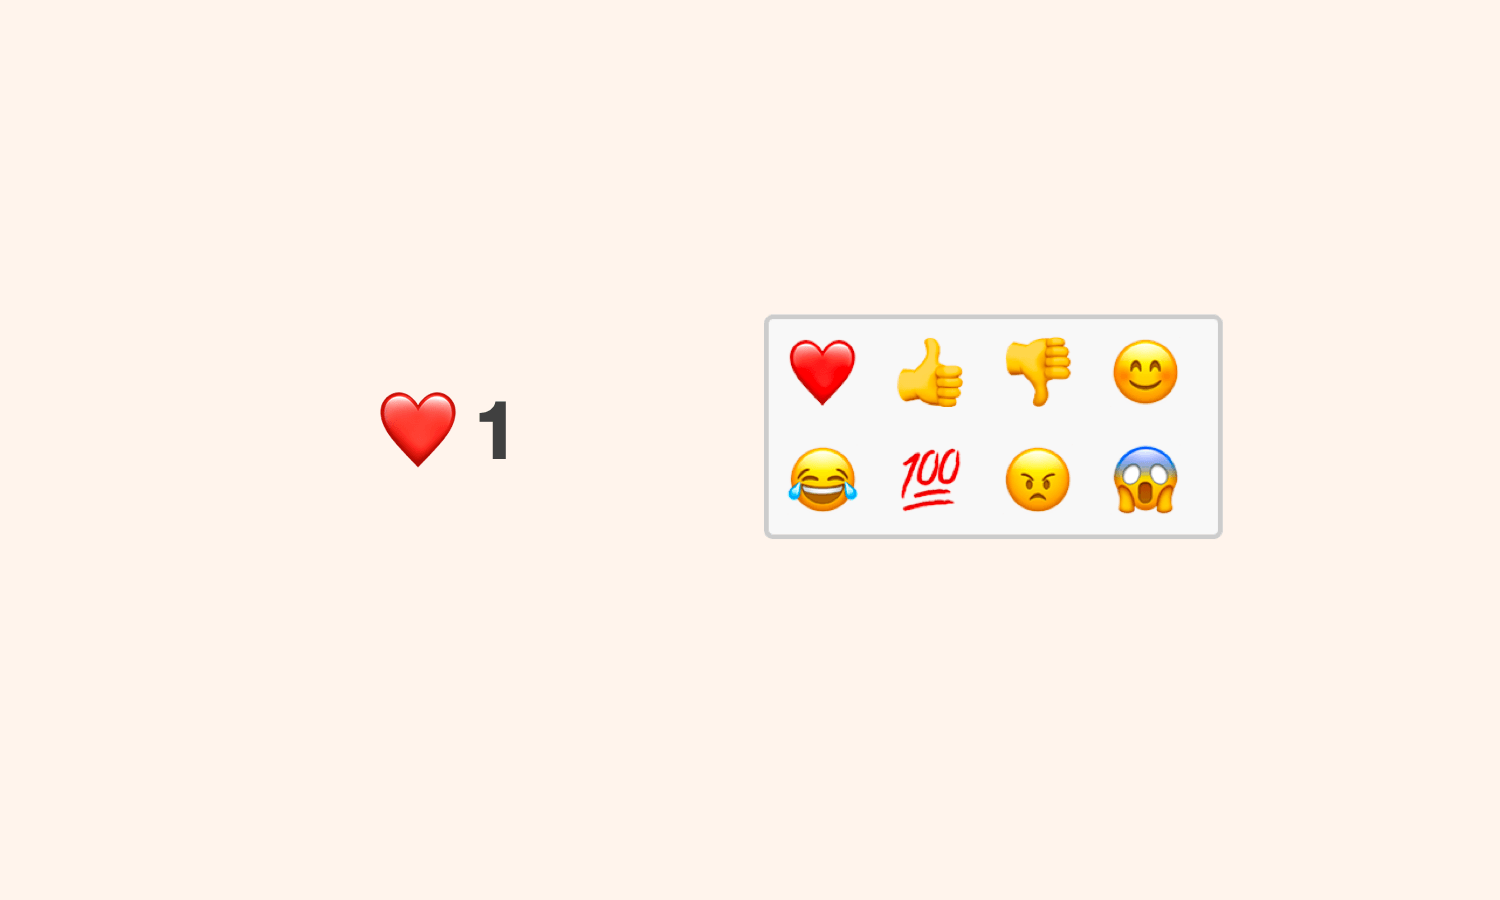 Likes and Emoji reactions